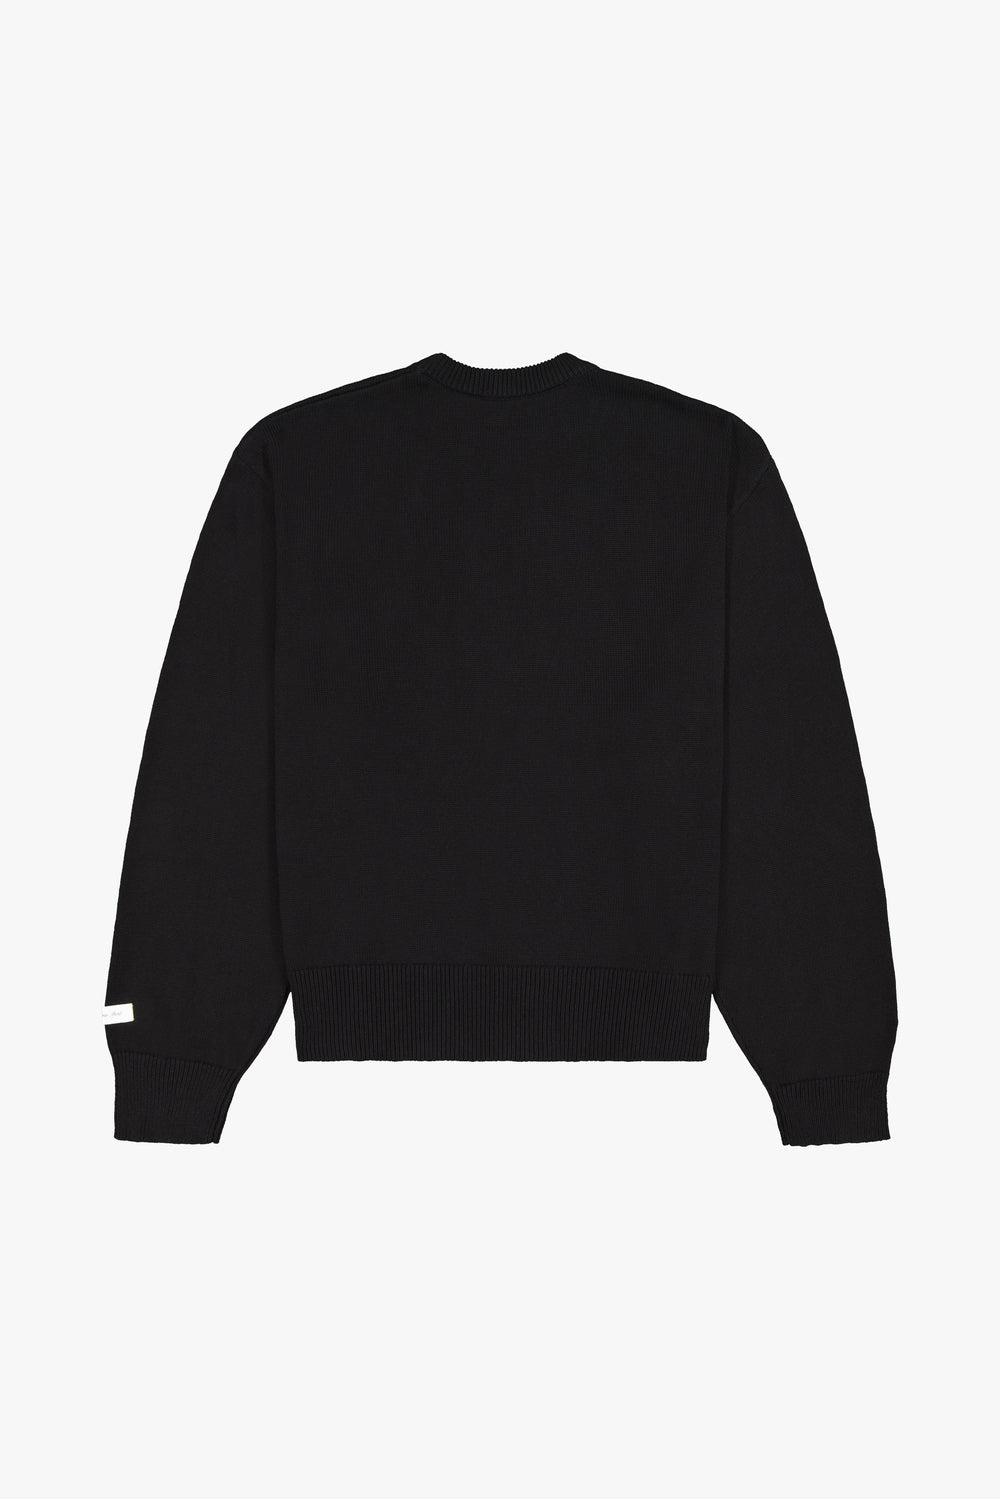 CONTRAST KNIT BLACK / WHITE | PORTER JAMES SPORTS | Mad About The Boy